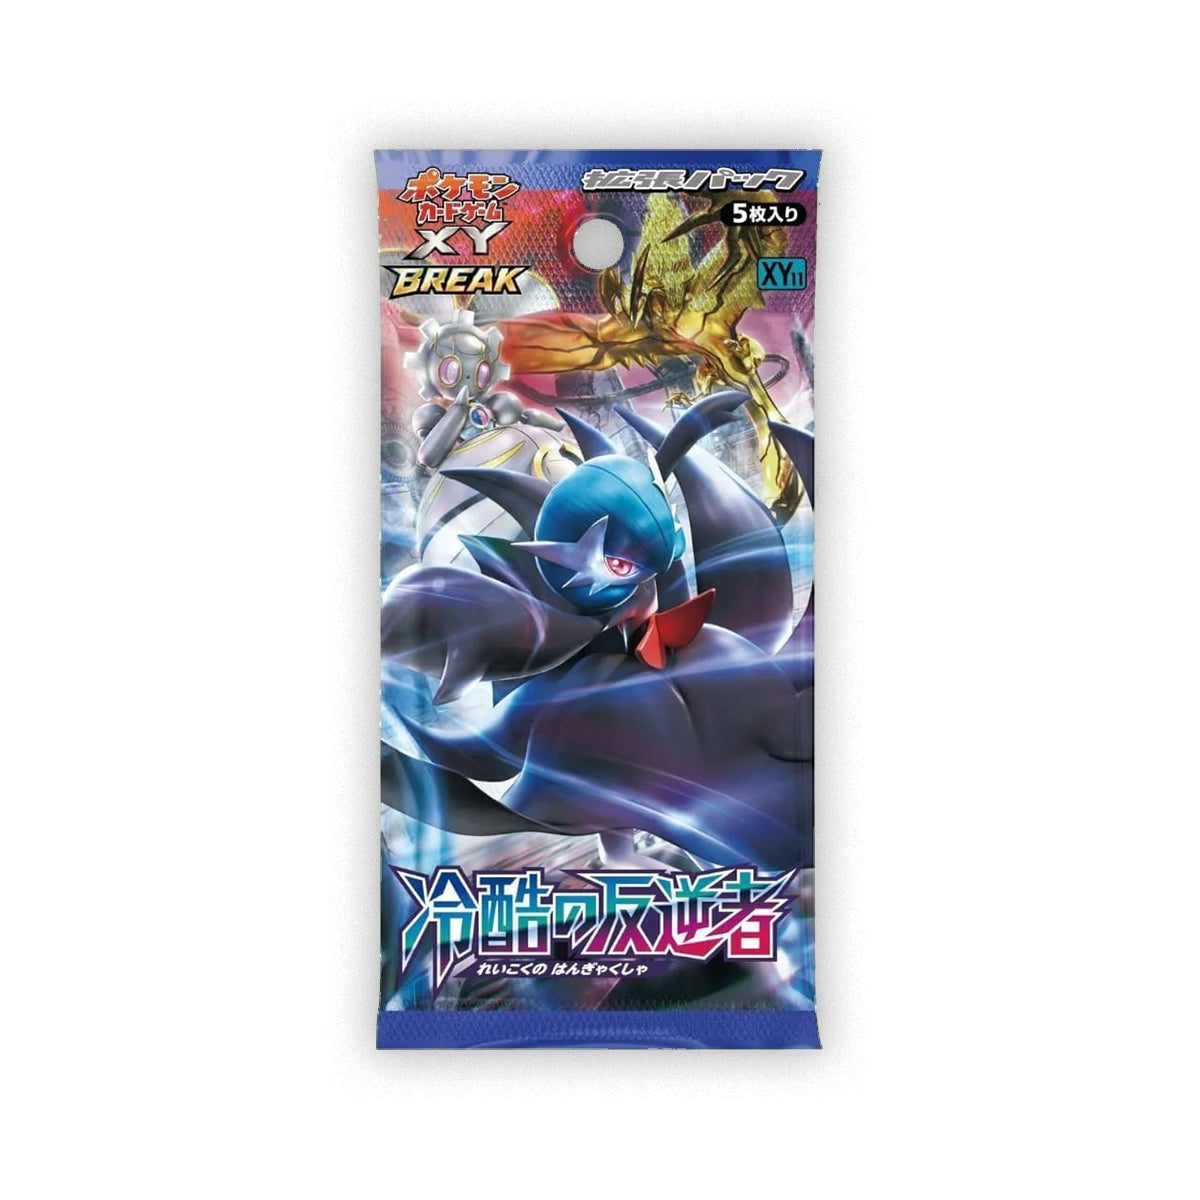 Pokémon TCG: XY BREAK Ruthless Traitor 1st Edition Booster Pack XY11 (Japanese)